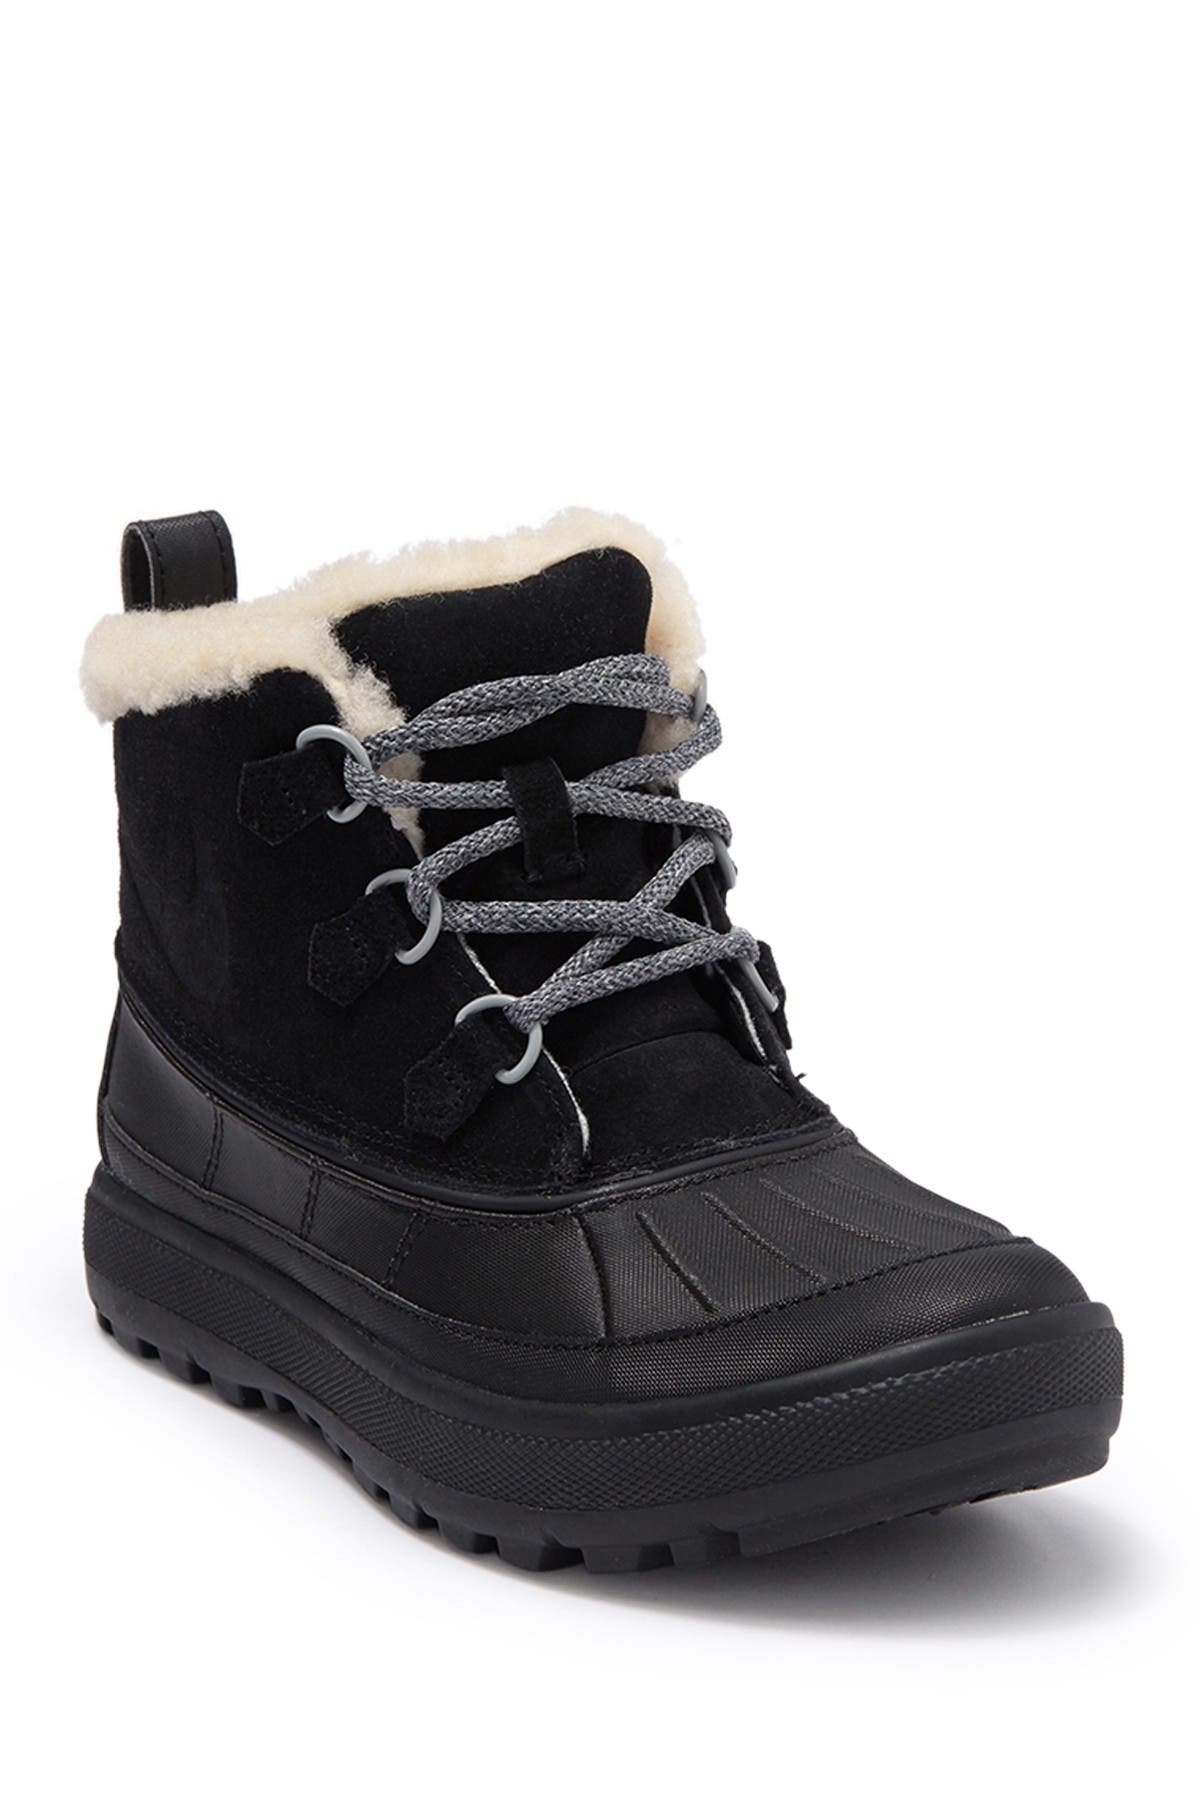 nike fur lined boots